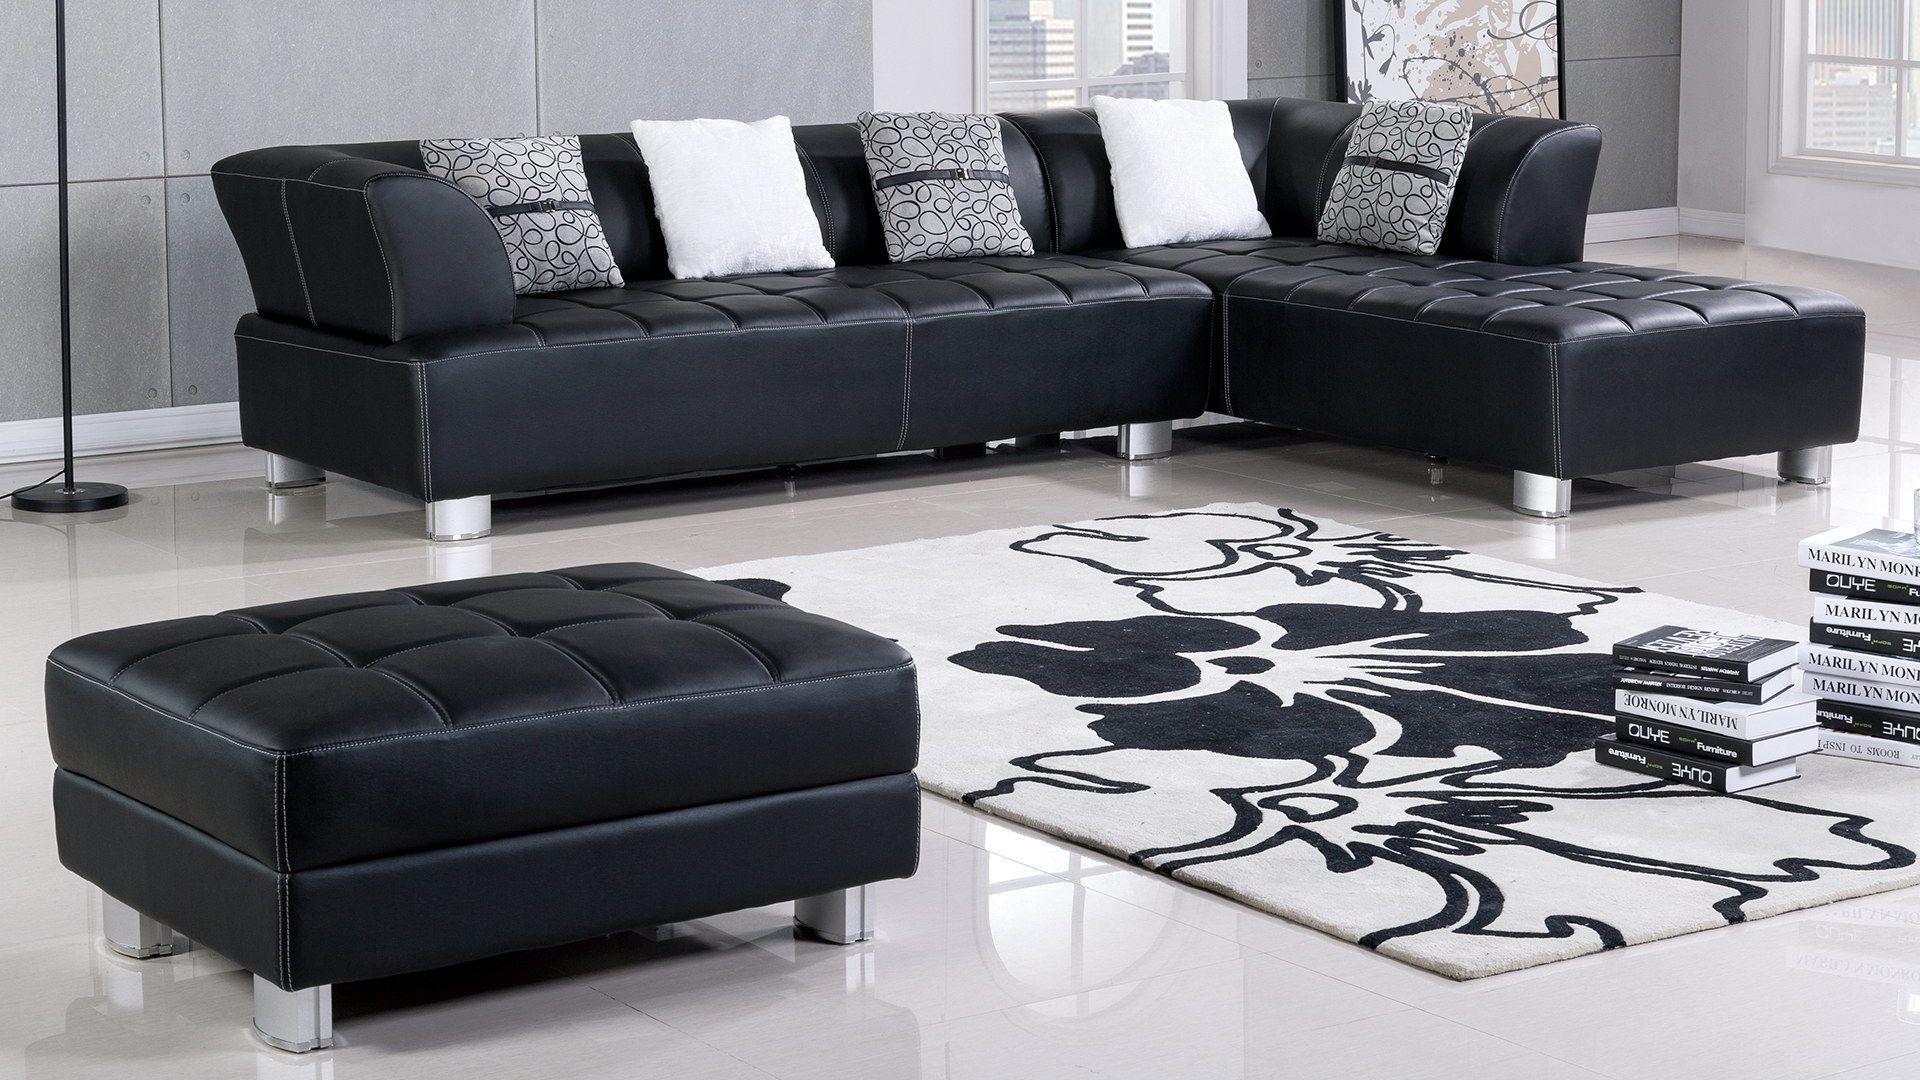 Contemporary, Modern Sectional Sofa Set AE-L138-BK AE-L138R-BK in Black Faux Leather